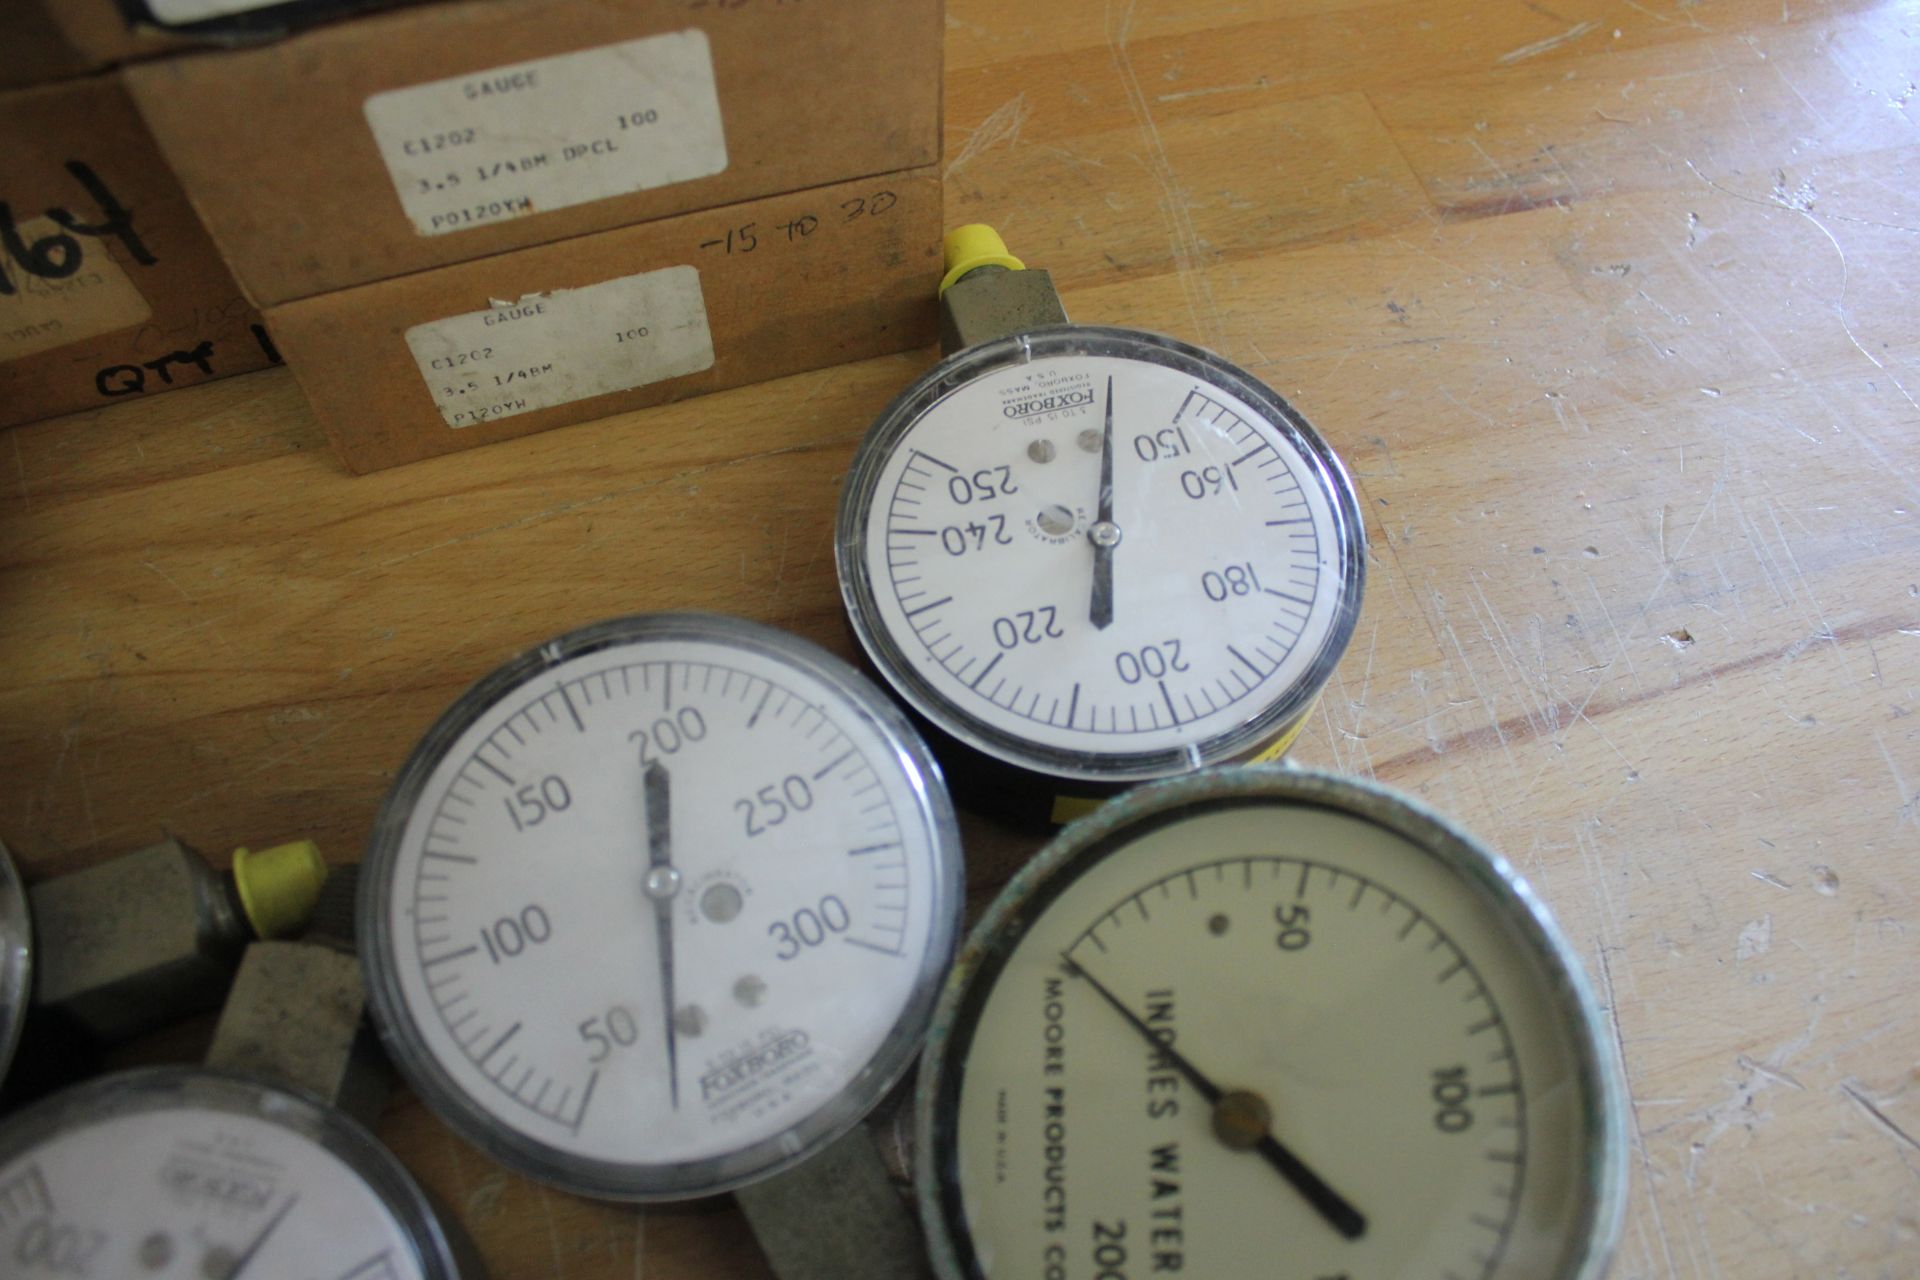 LOT OF NEW & USED INDUSTRIAL PRESSURE GAUGES - Image 8 of 8